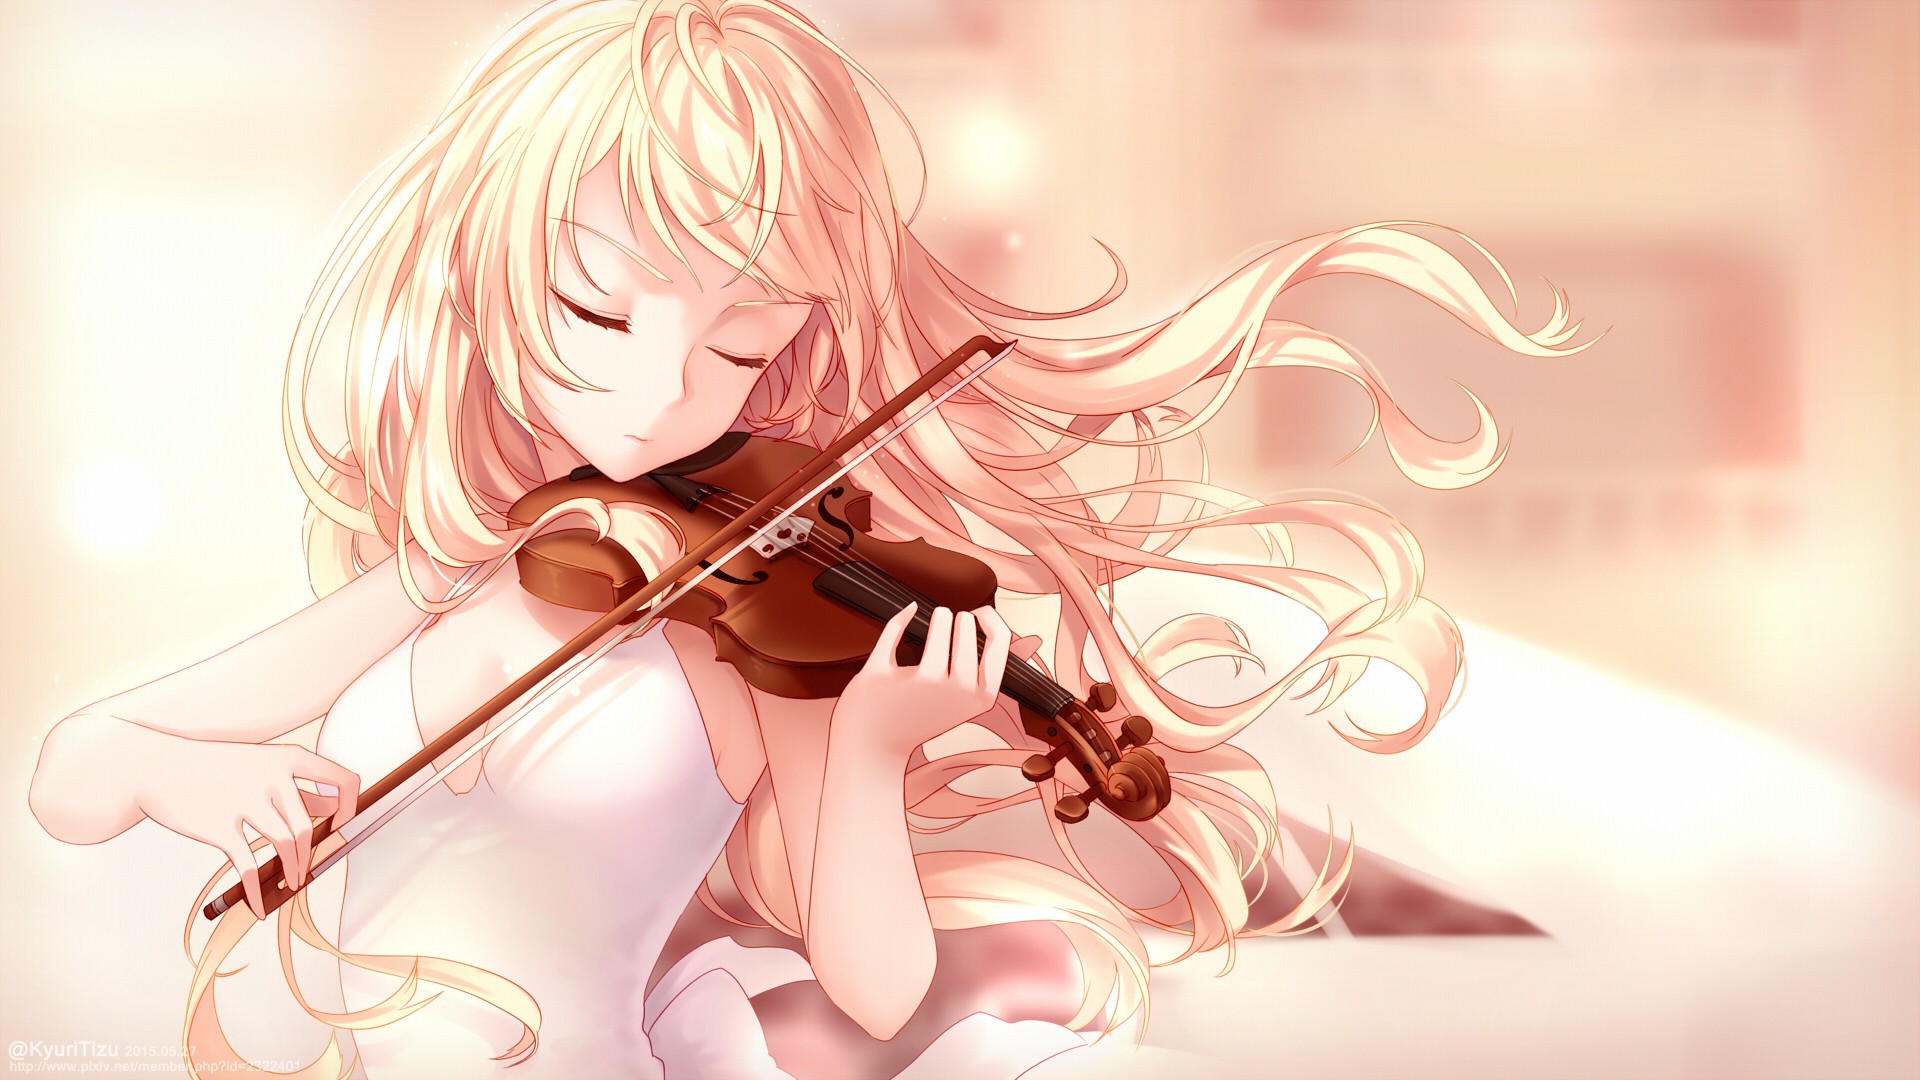 anime guy with Violin by kideart on DeviantArt